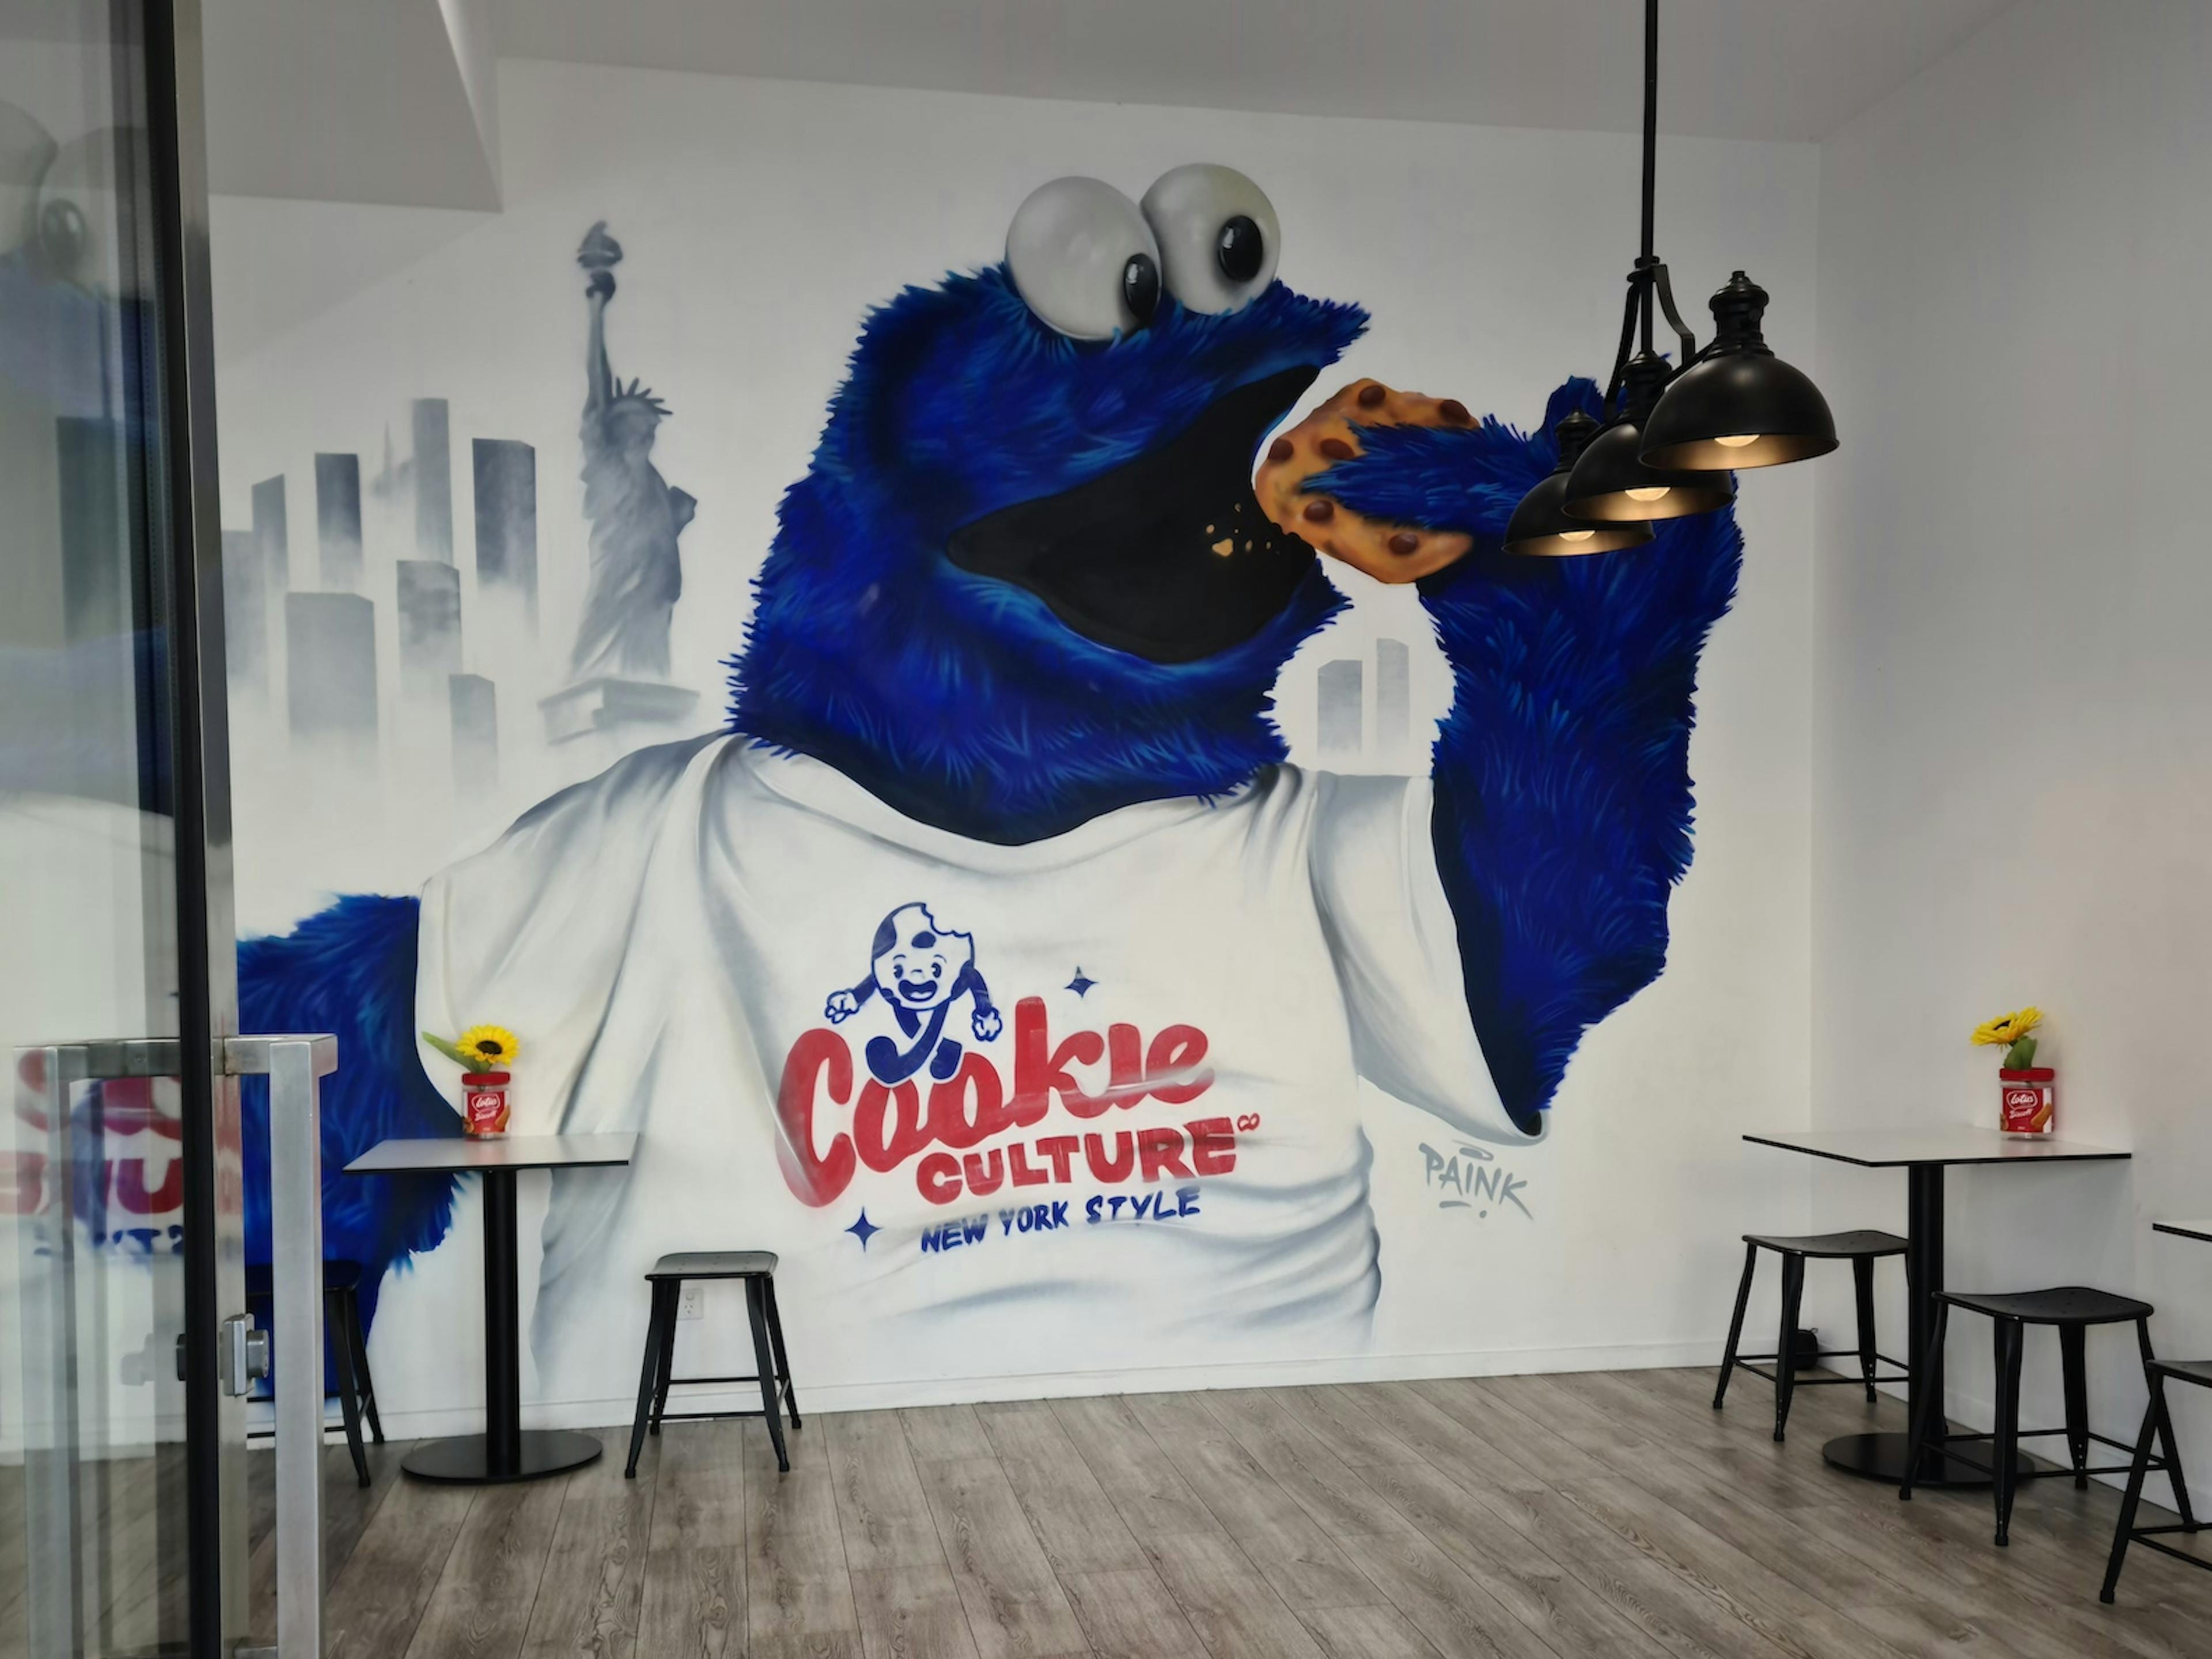 Mural of cookie monster wearing a Cookie Culture shirt